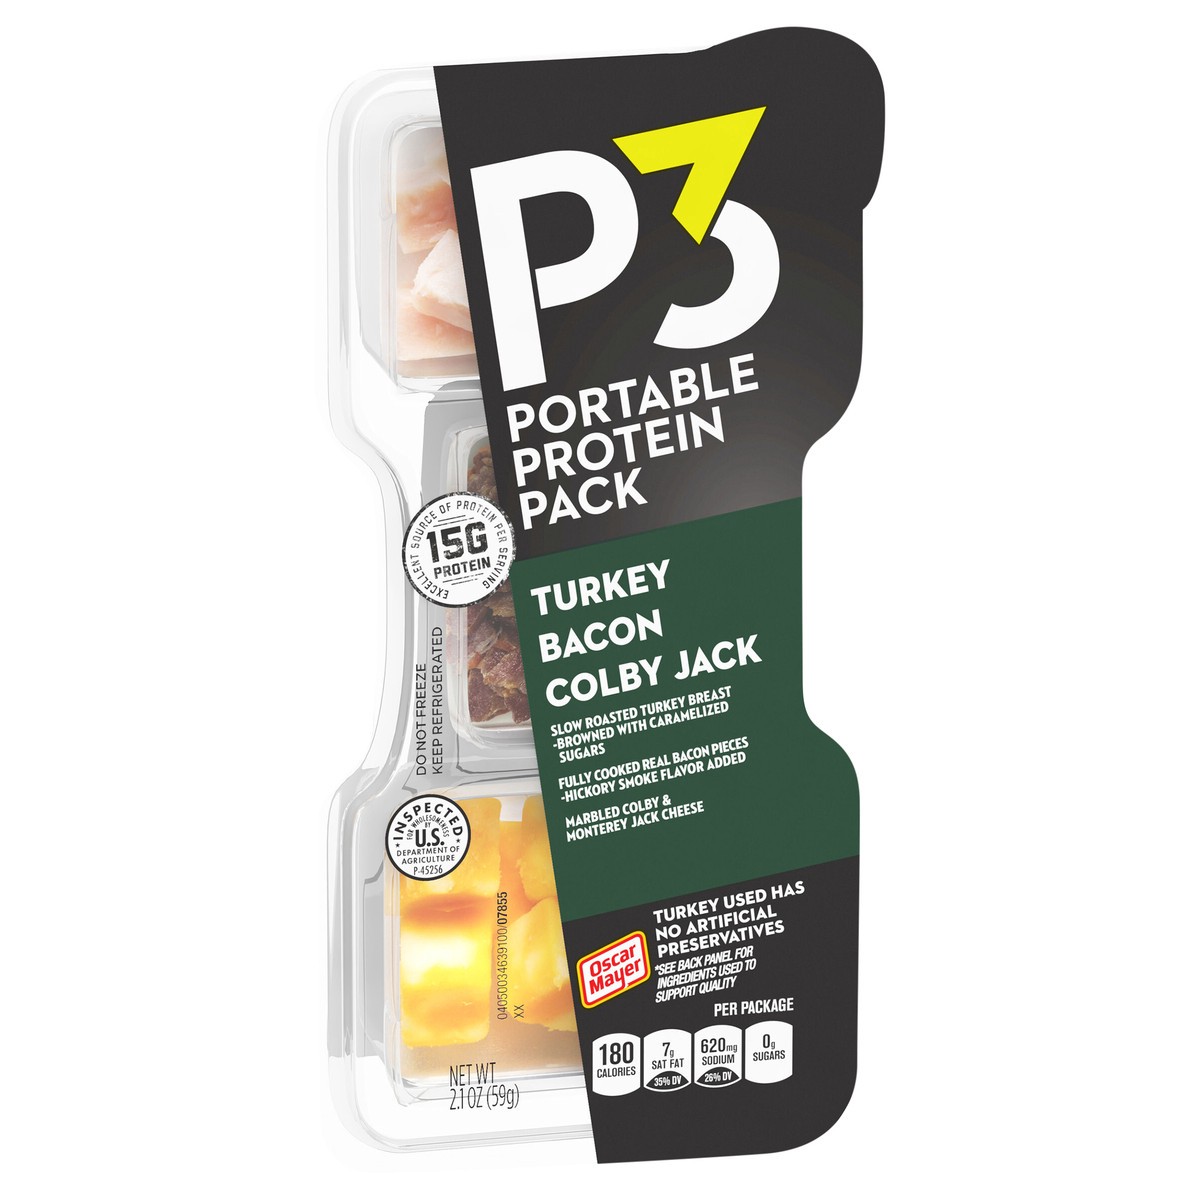 slide 7 of 9, P3 Portable Protein Snack Pack with Turkey, Bacon & Colby Jack Cheese, 2.1 oz Tray, 2.1 oz